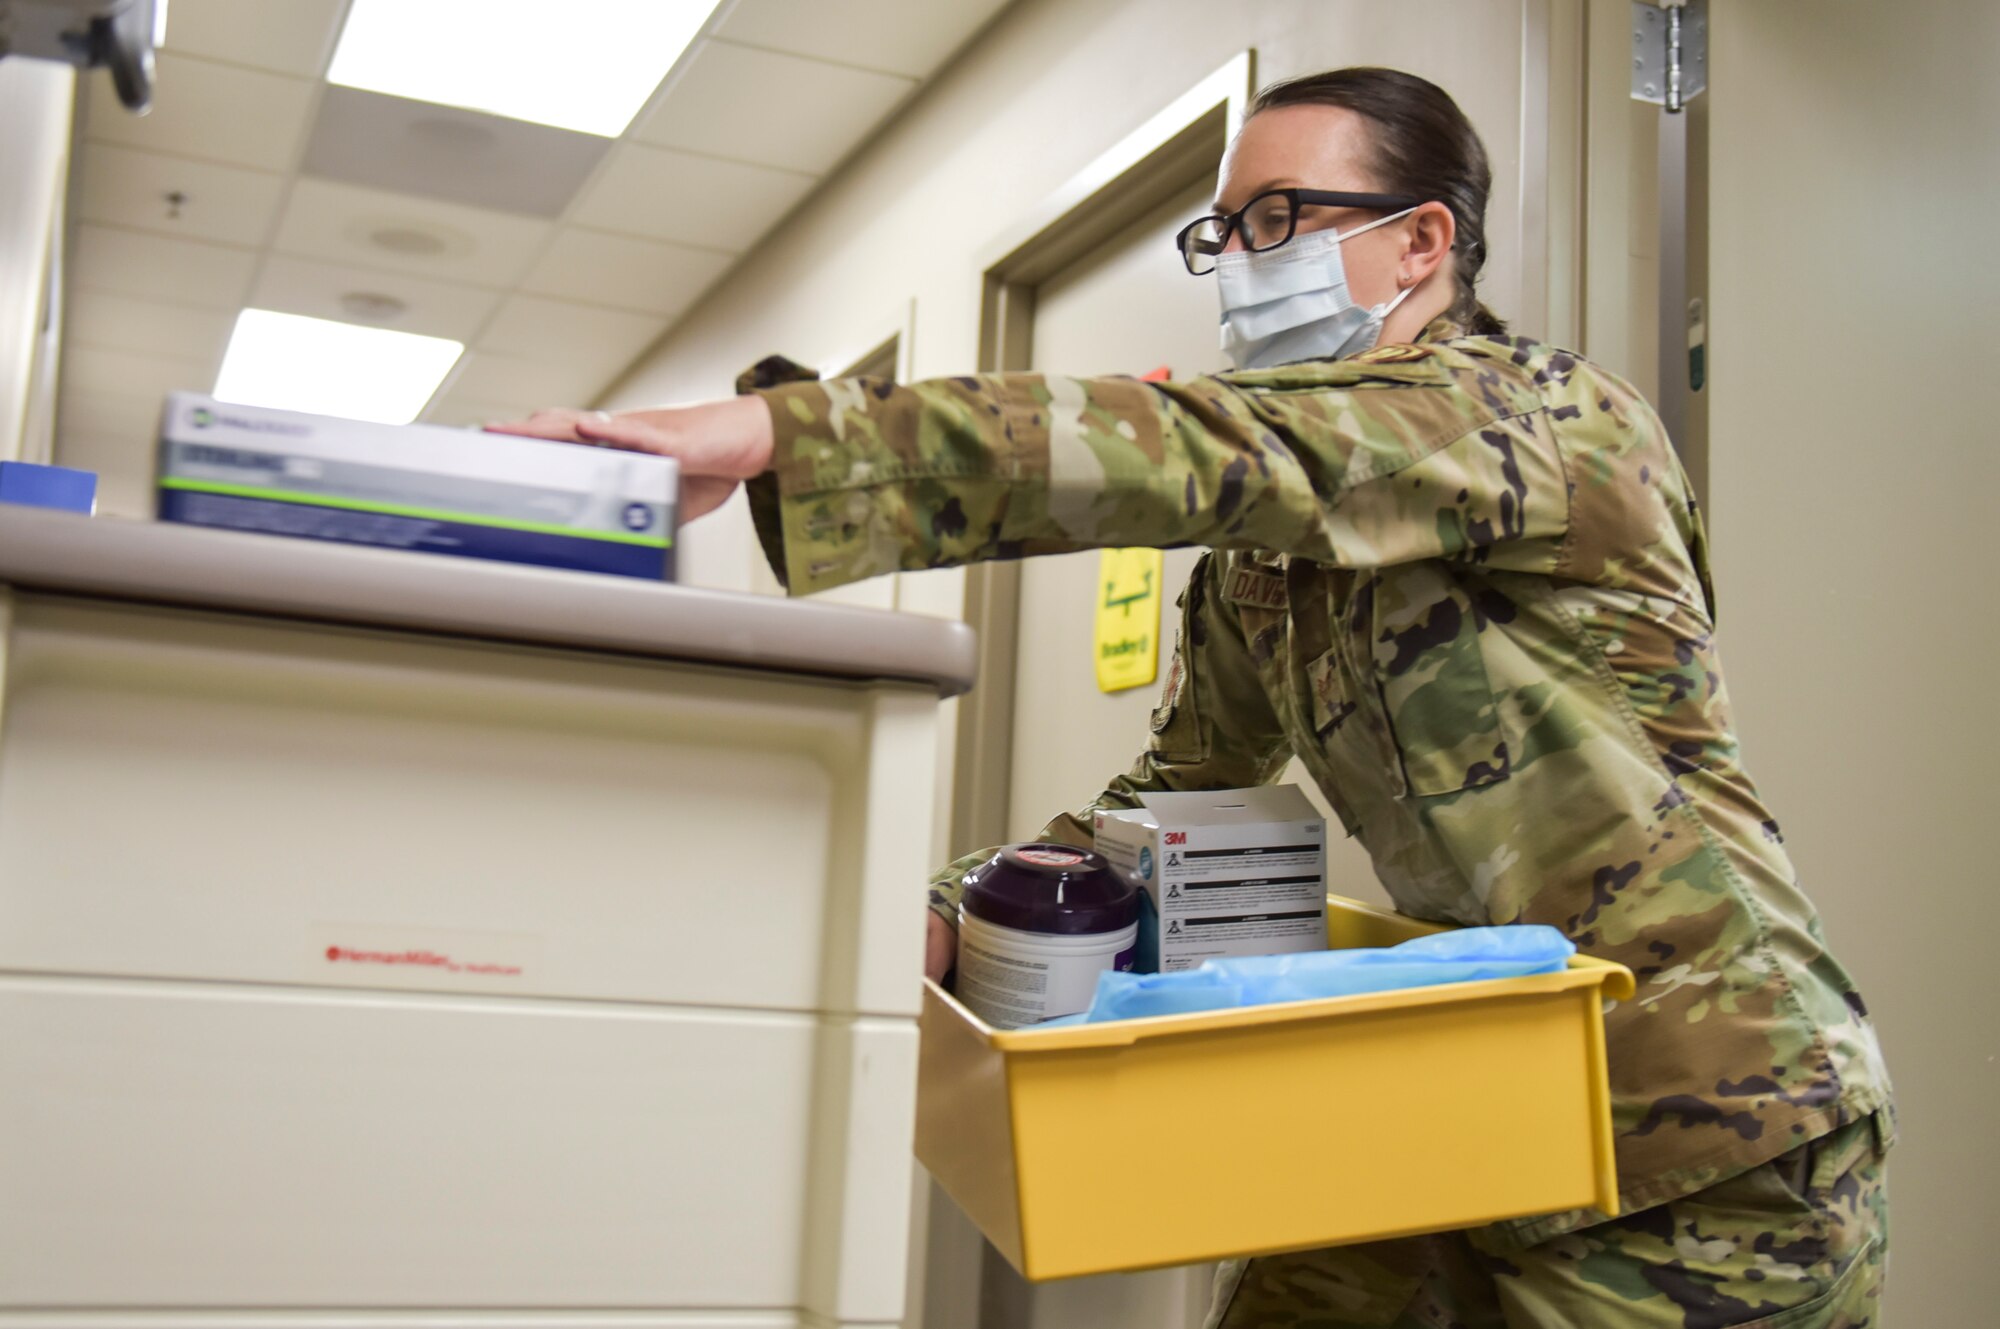 U.S. Air Force Staff Sgt. Jessica Davenport, 92nd Health Care Operations Squadron respiratory clinic technician, packs supplies used by the respiratory clinic the day before closing at Fairchild Air Force Base, Washington, June 30, 2021.